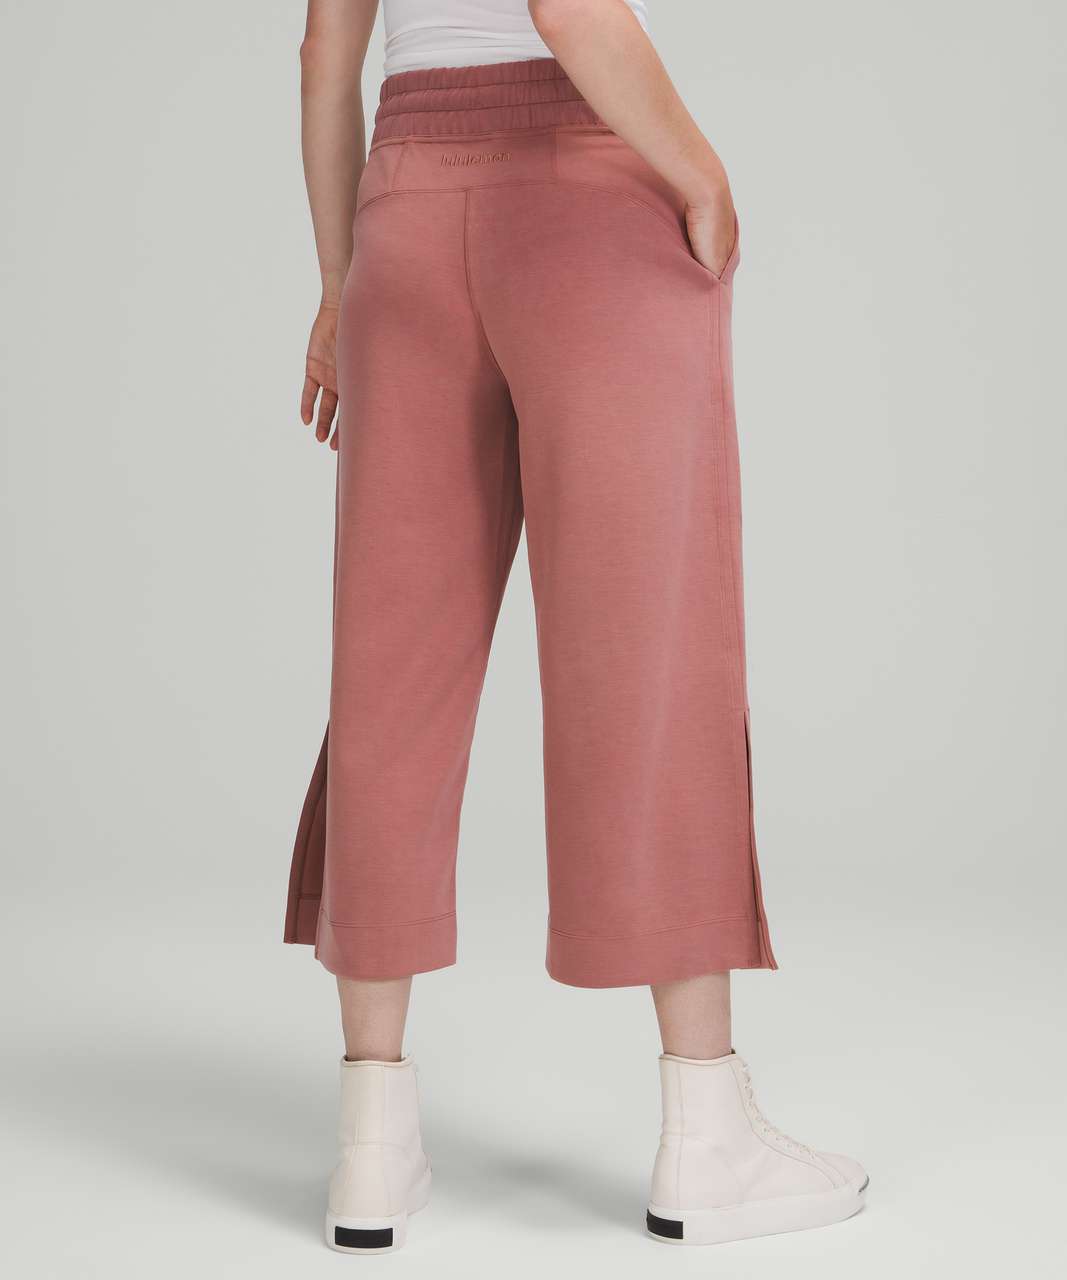 Lululemon Soft Ambitions High Rise Crop *Softstreme - Spiced Chai